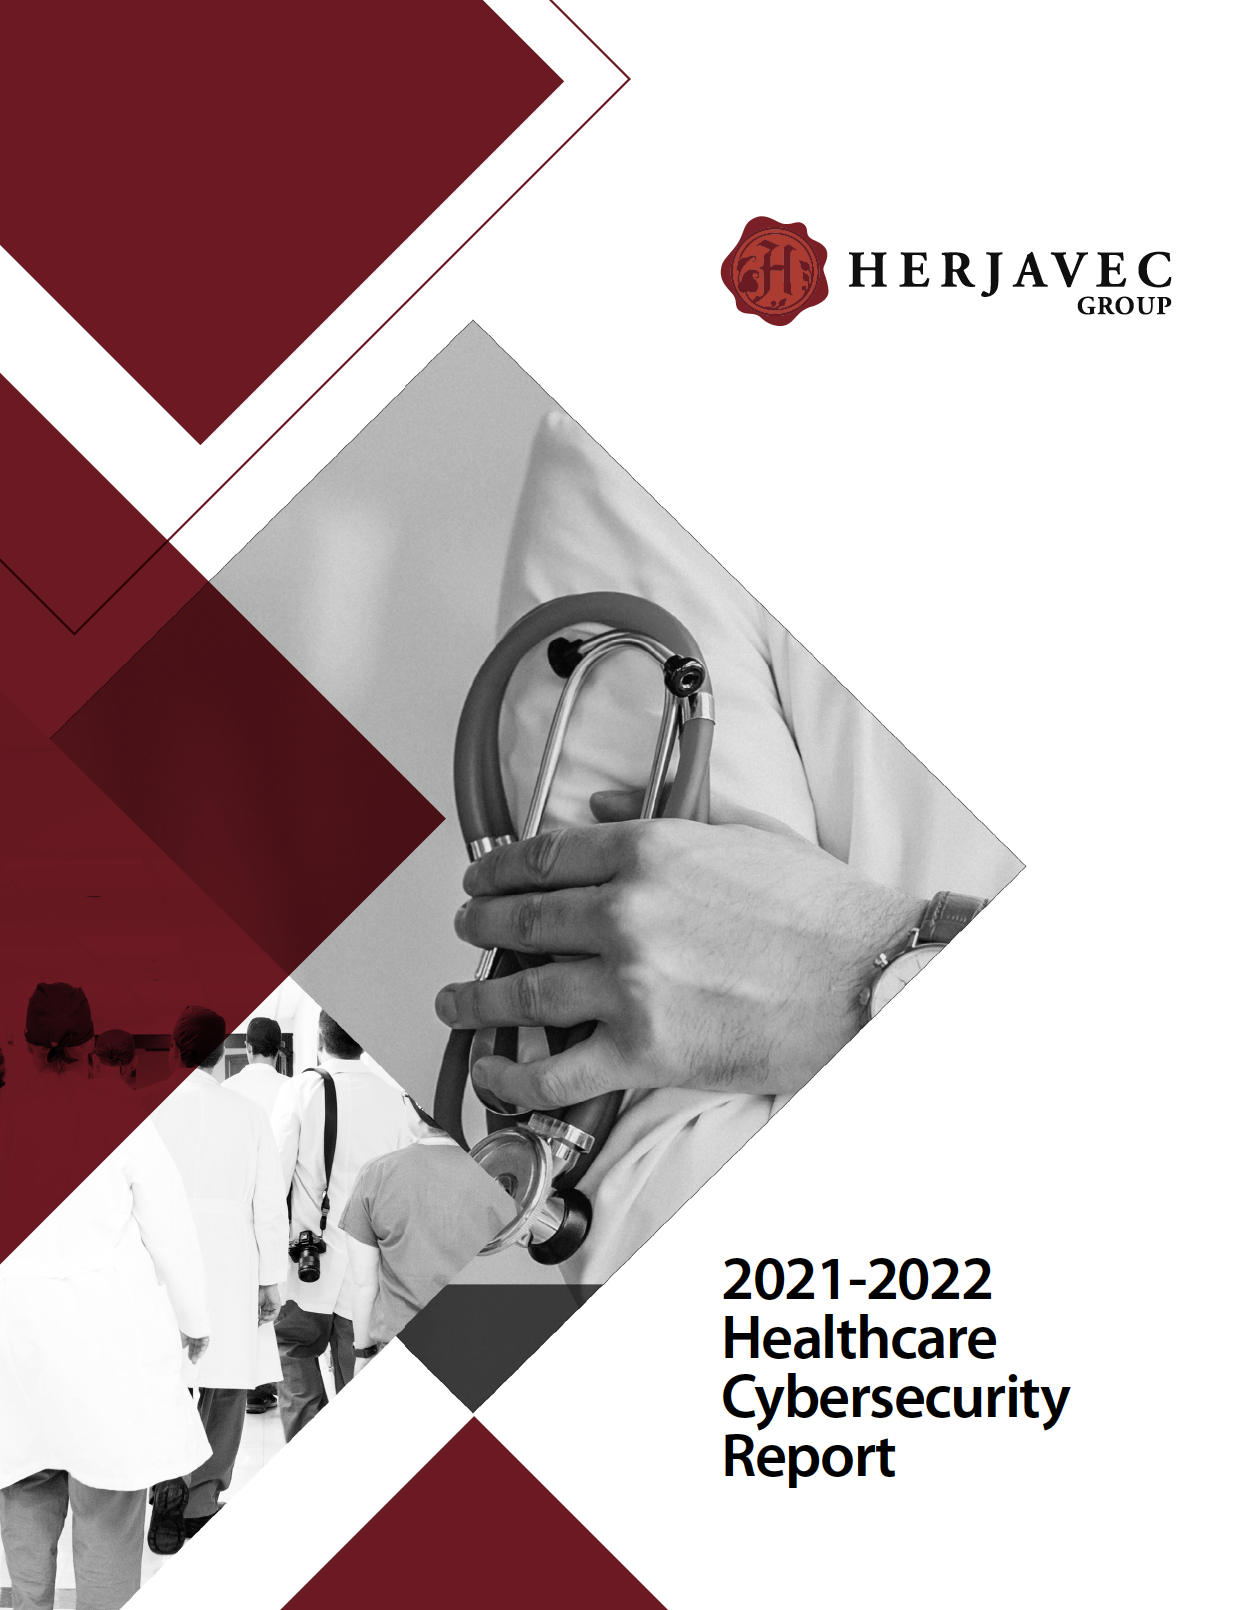 Healthcare Cybersecurity in 2021-2022 Report